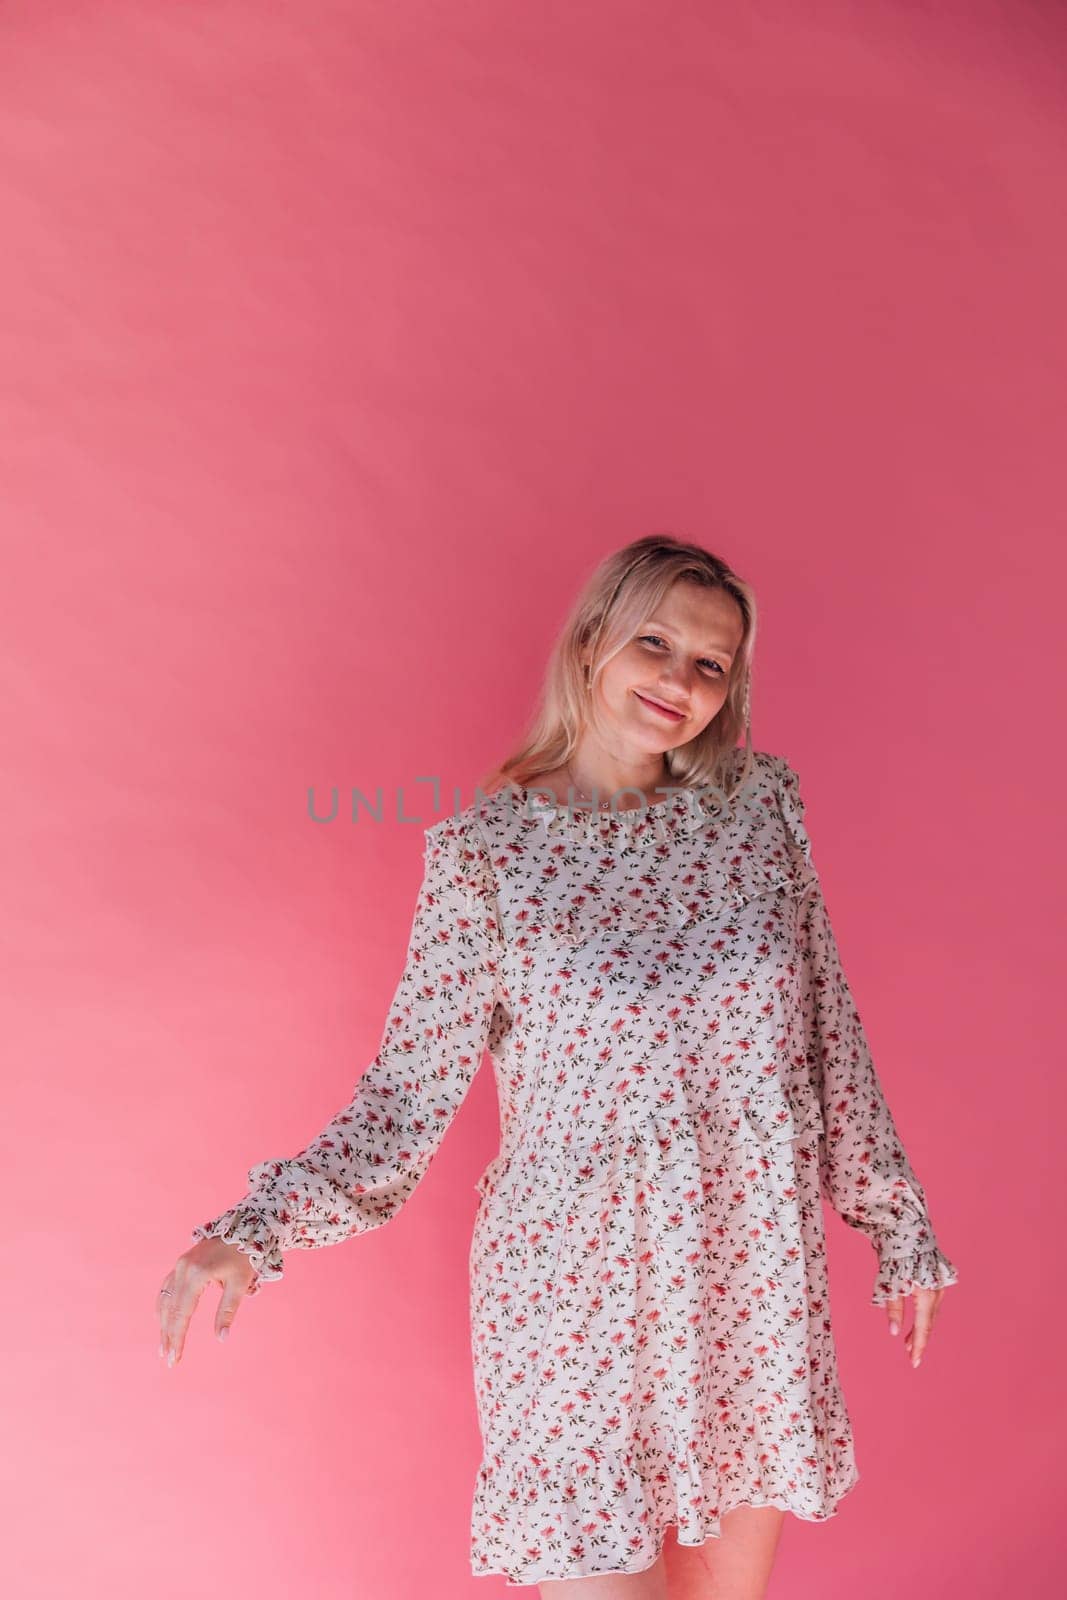 Woman smiling and dancing to music on pink background by Simakov